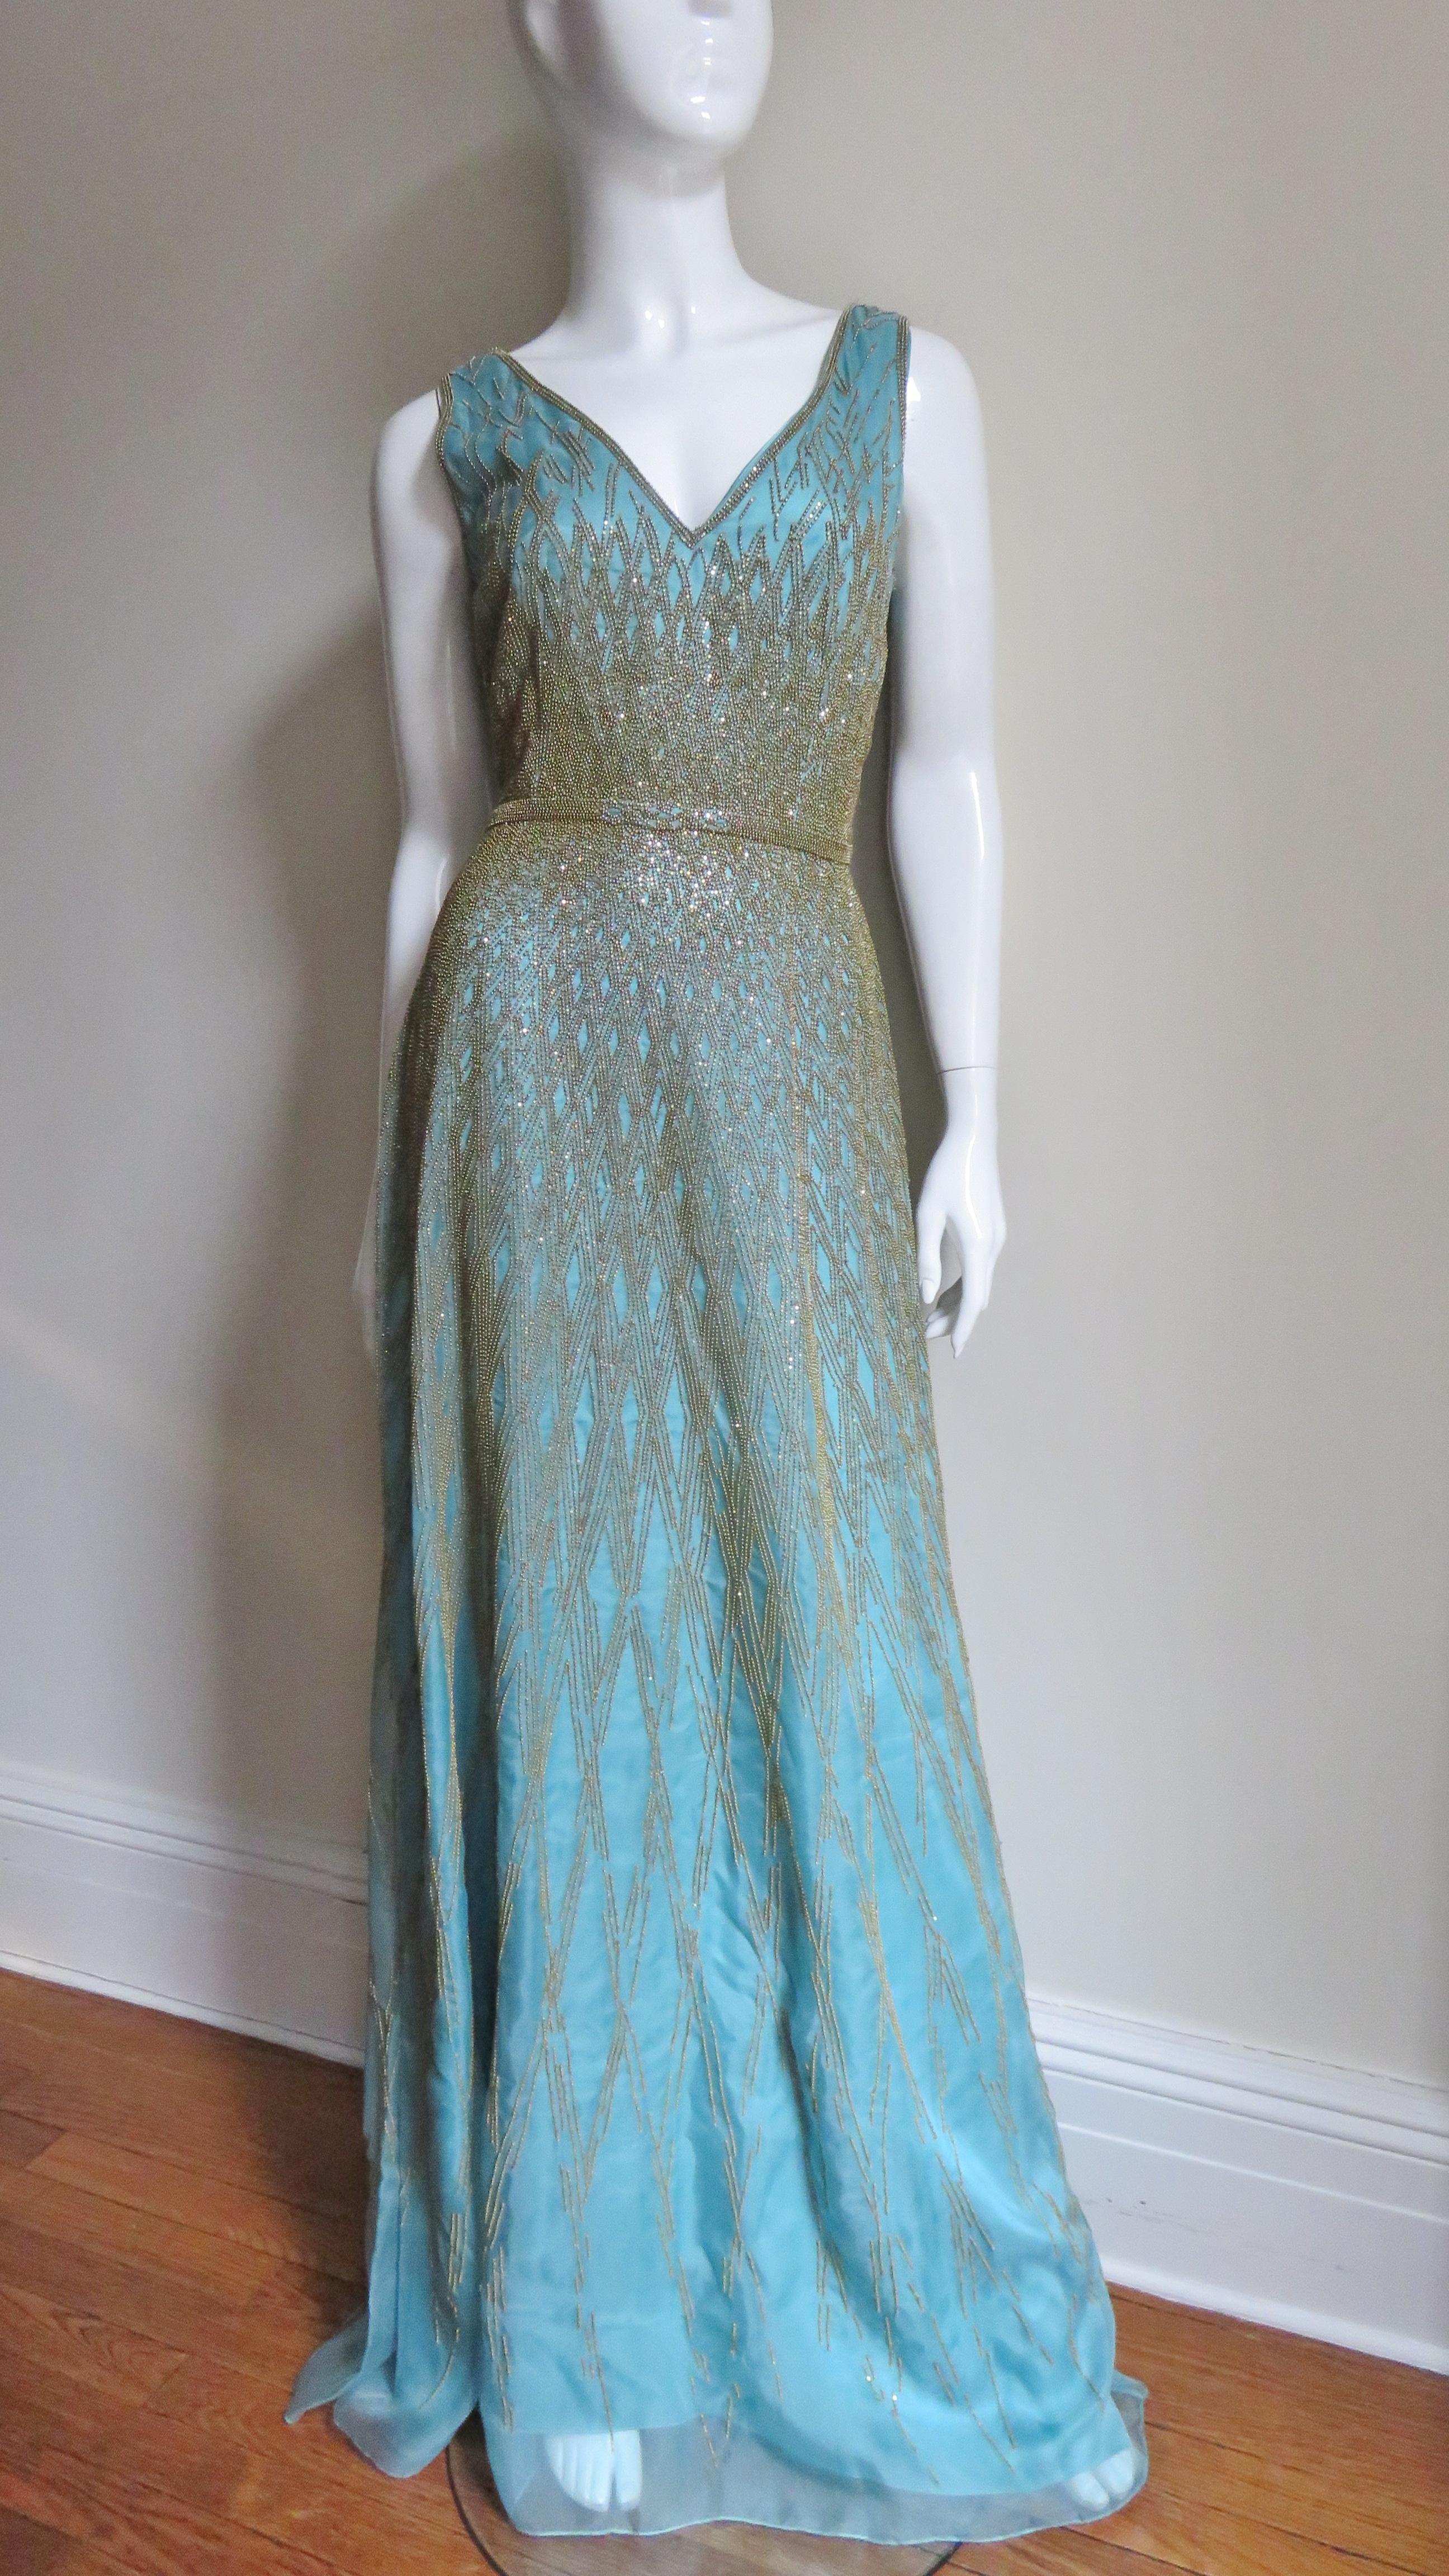 A gorgeous aqua silk gown covered in an elaborate pattern of gold glass beading by Carolina Herrera.  It is sleeveless with a V neckline, fitted waist, and full skirt.  There is an intricate diamond pattern of gold glass beading on semi sheer aqua